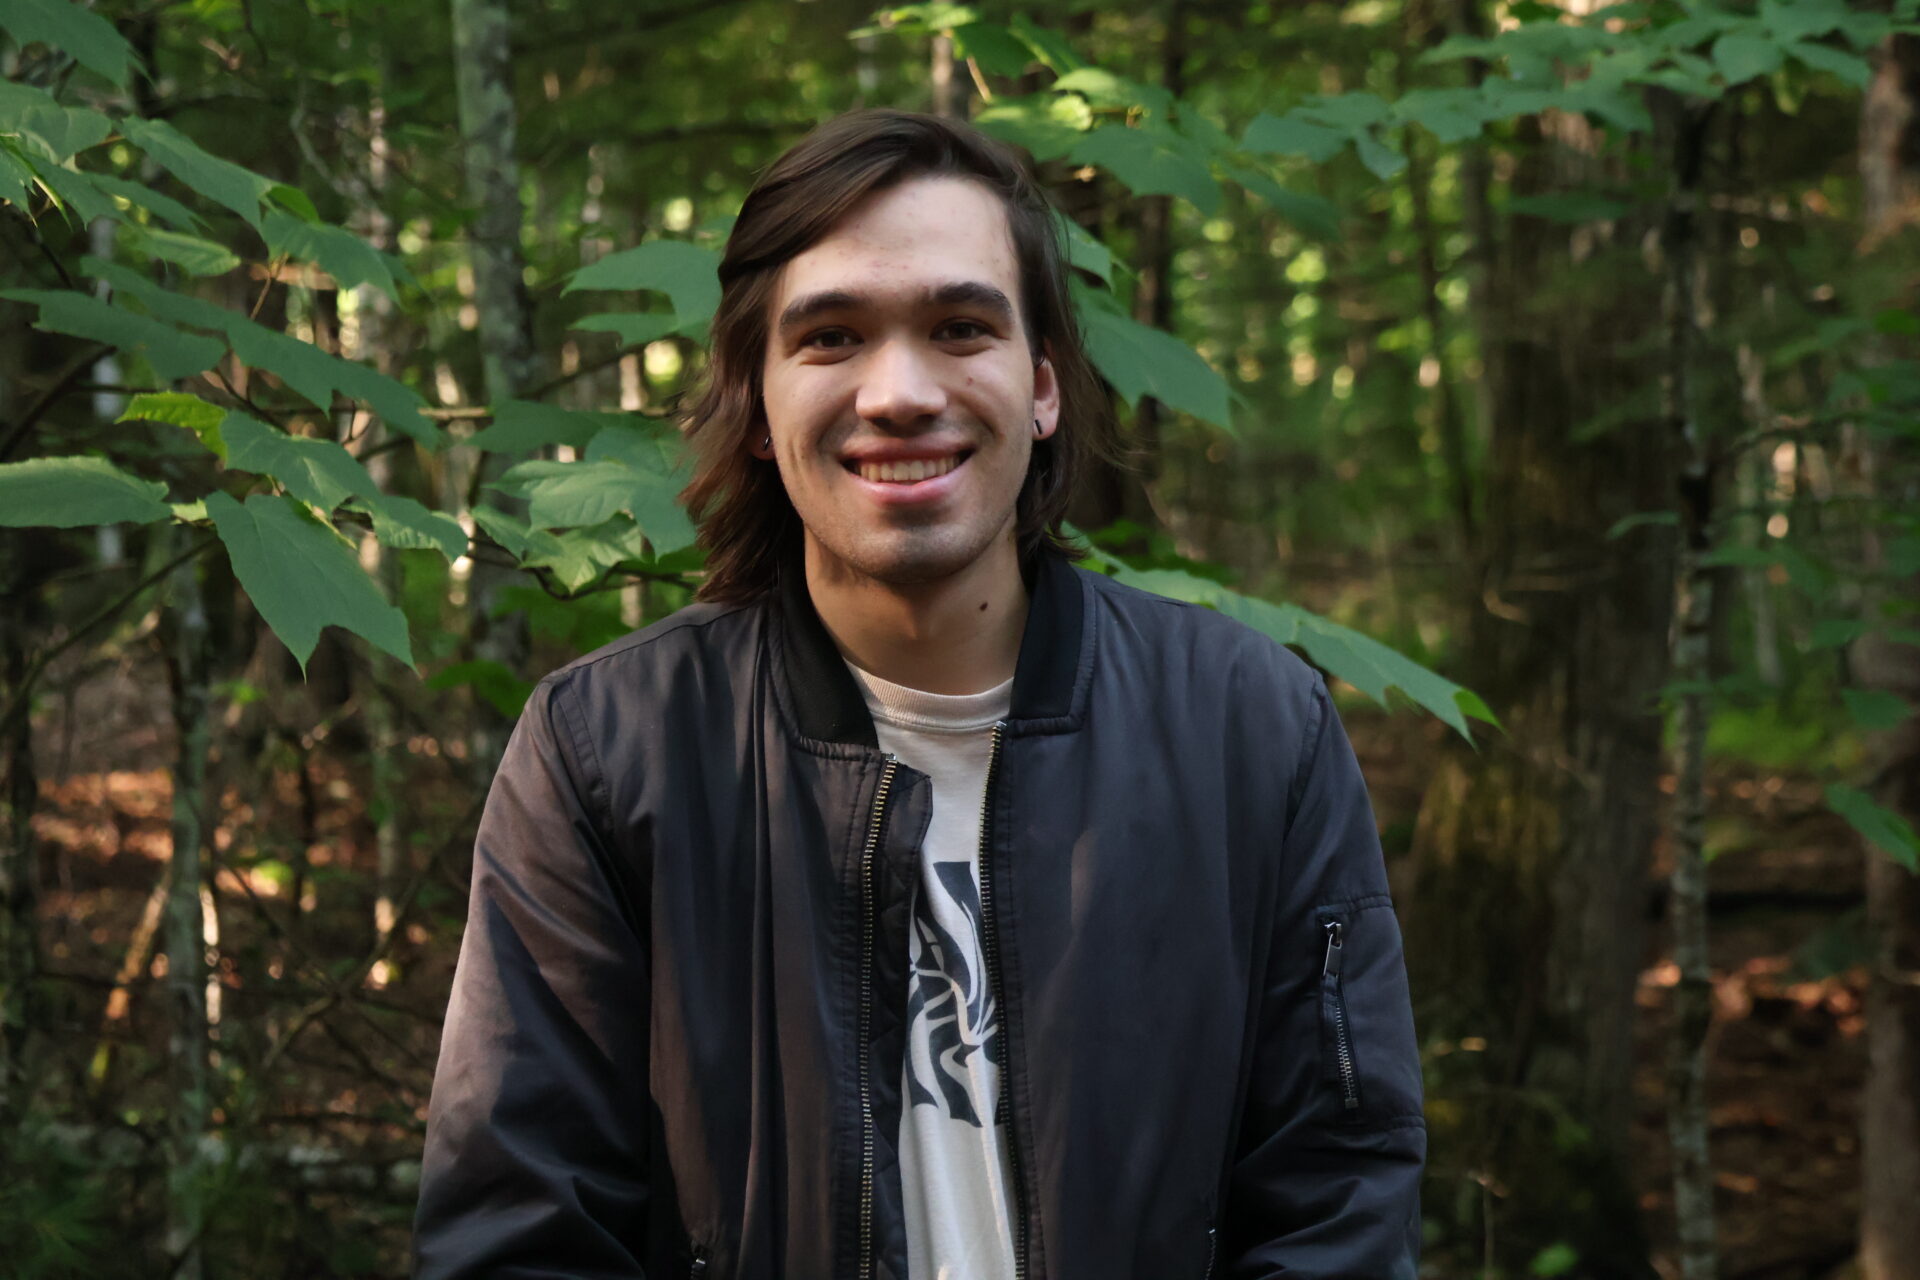 A young male smiling with a tree behind him, with long dark hair and a leather jacket on.